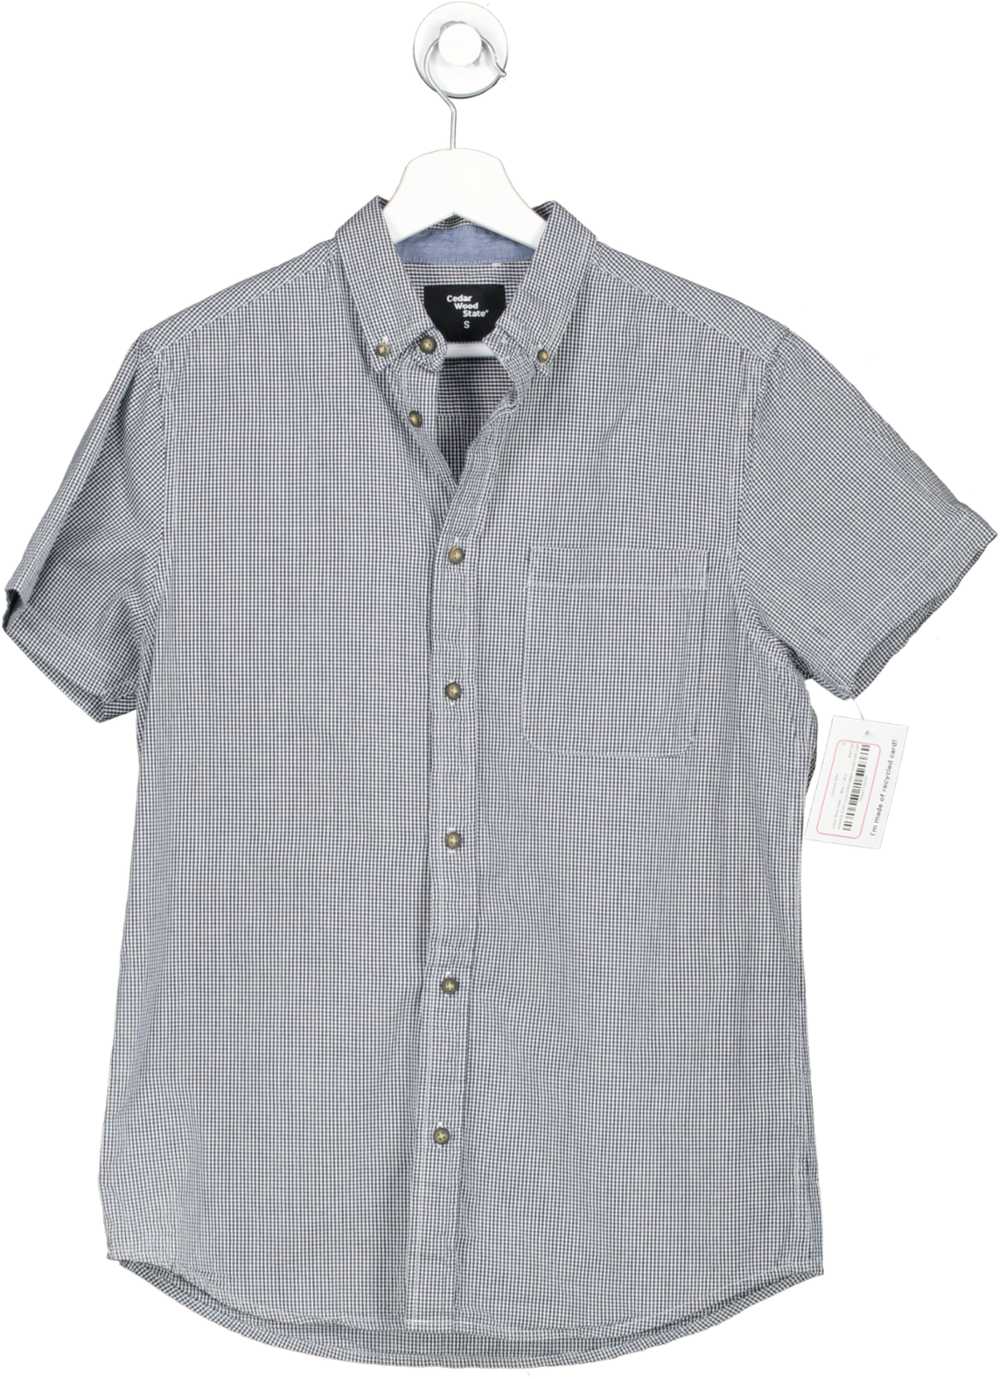 Cedar Wood State Blue Checked Shirt UK S - image 1